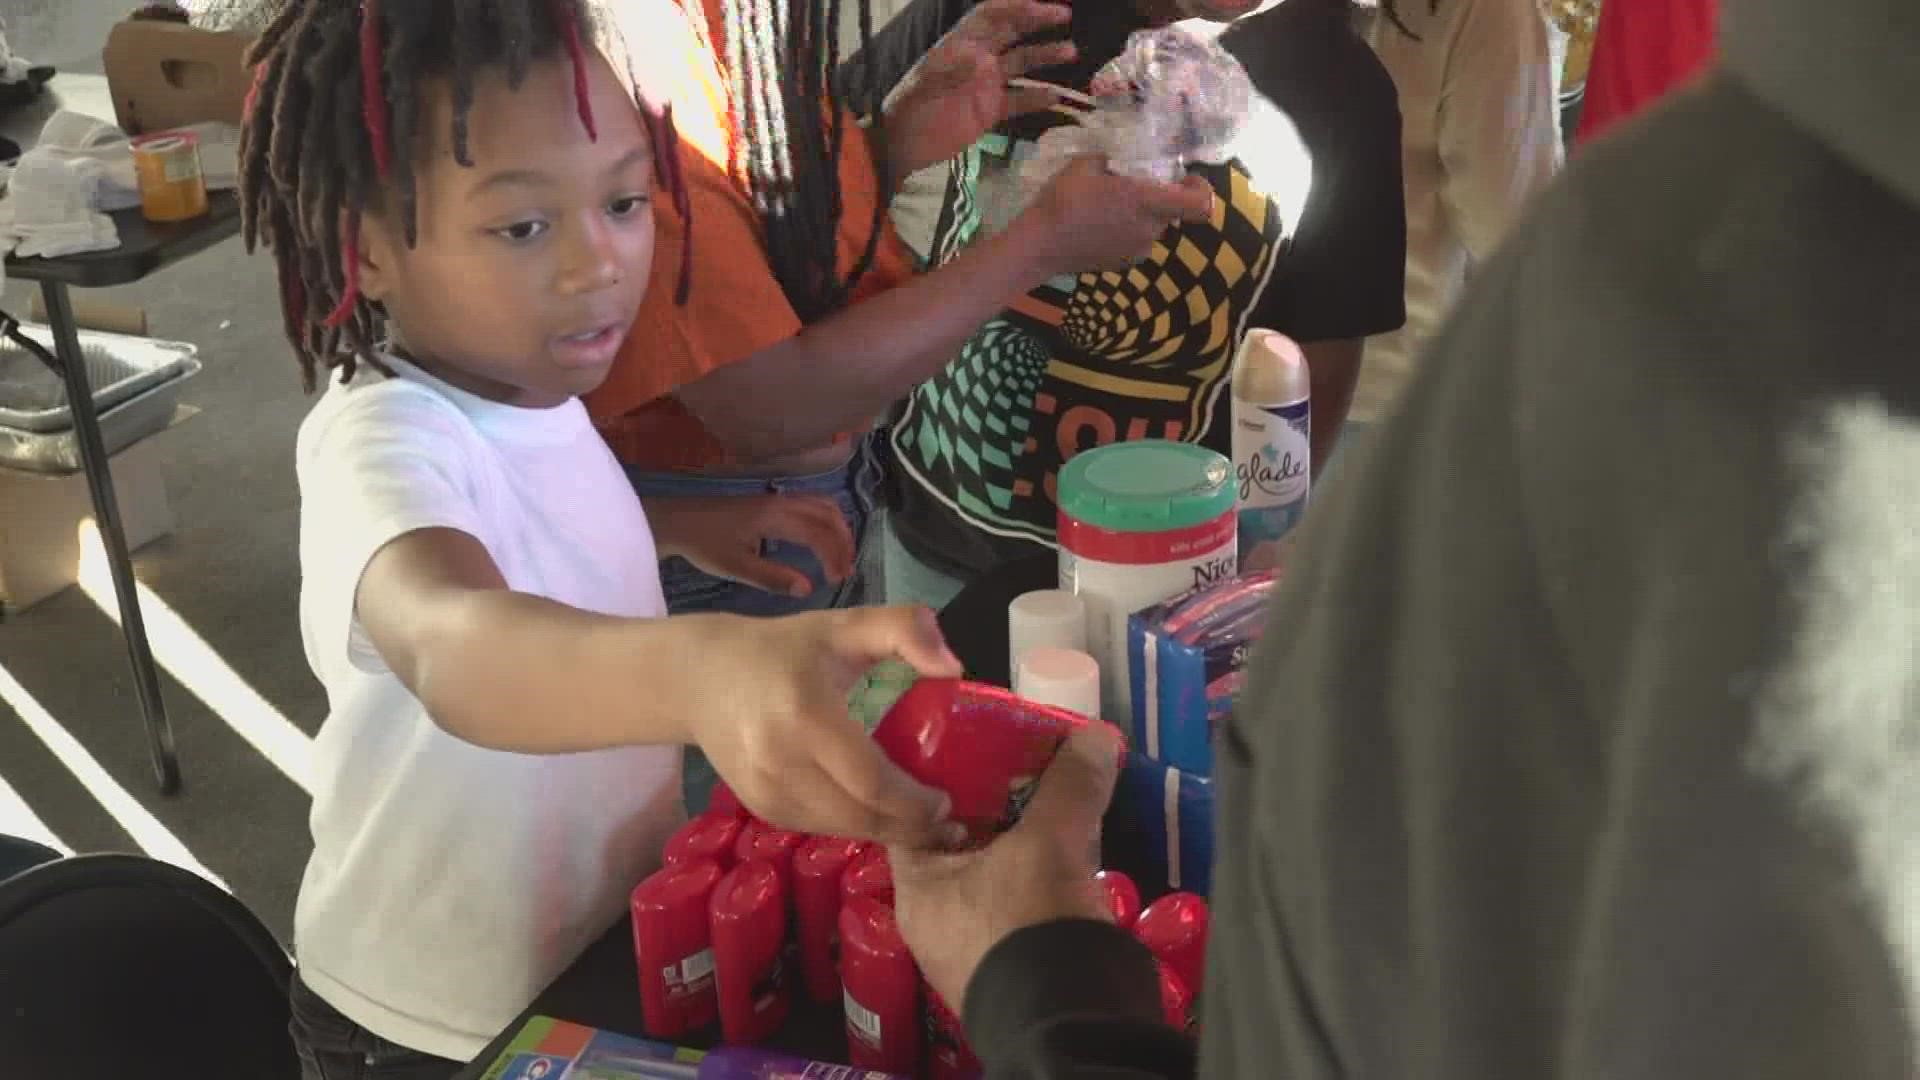 A boy’s birthday wish to feed N.O. homeless, comes true with a little help